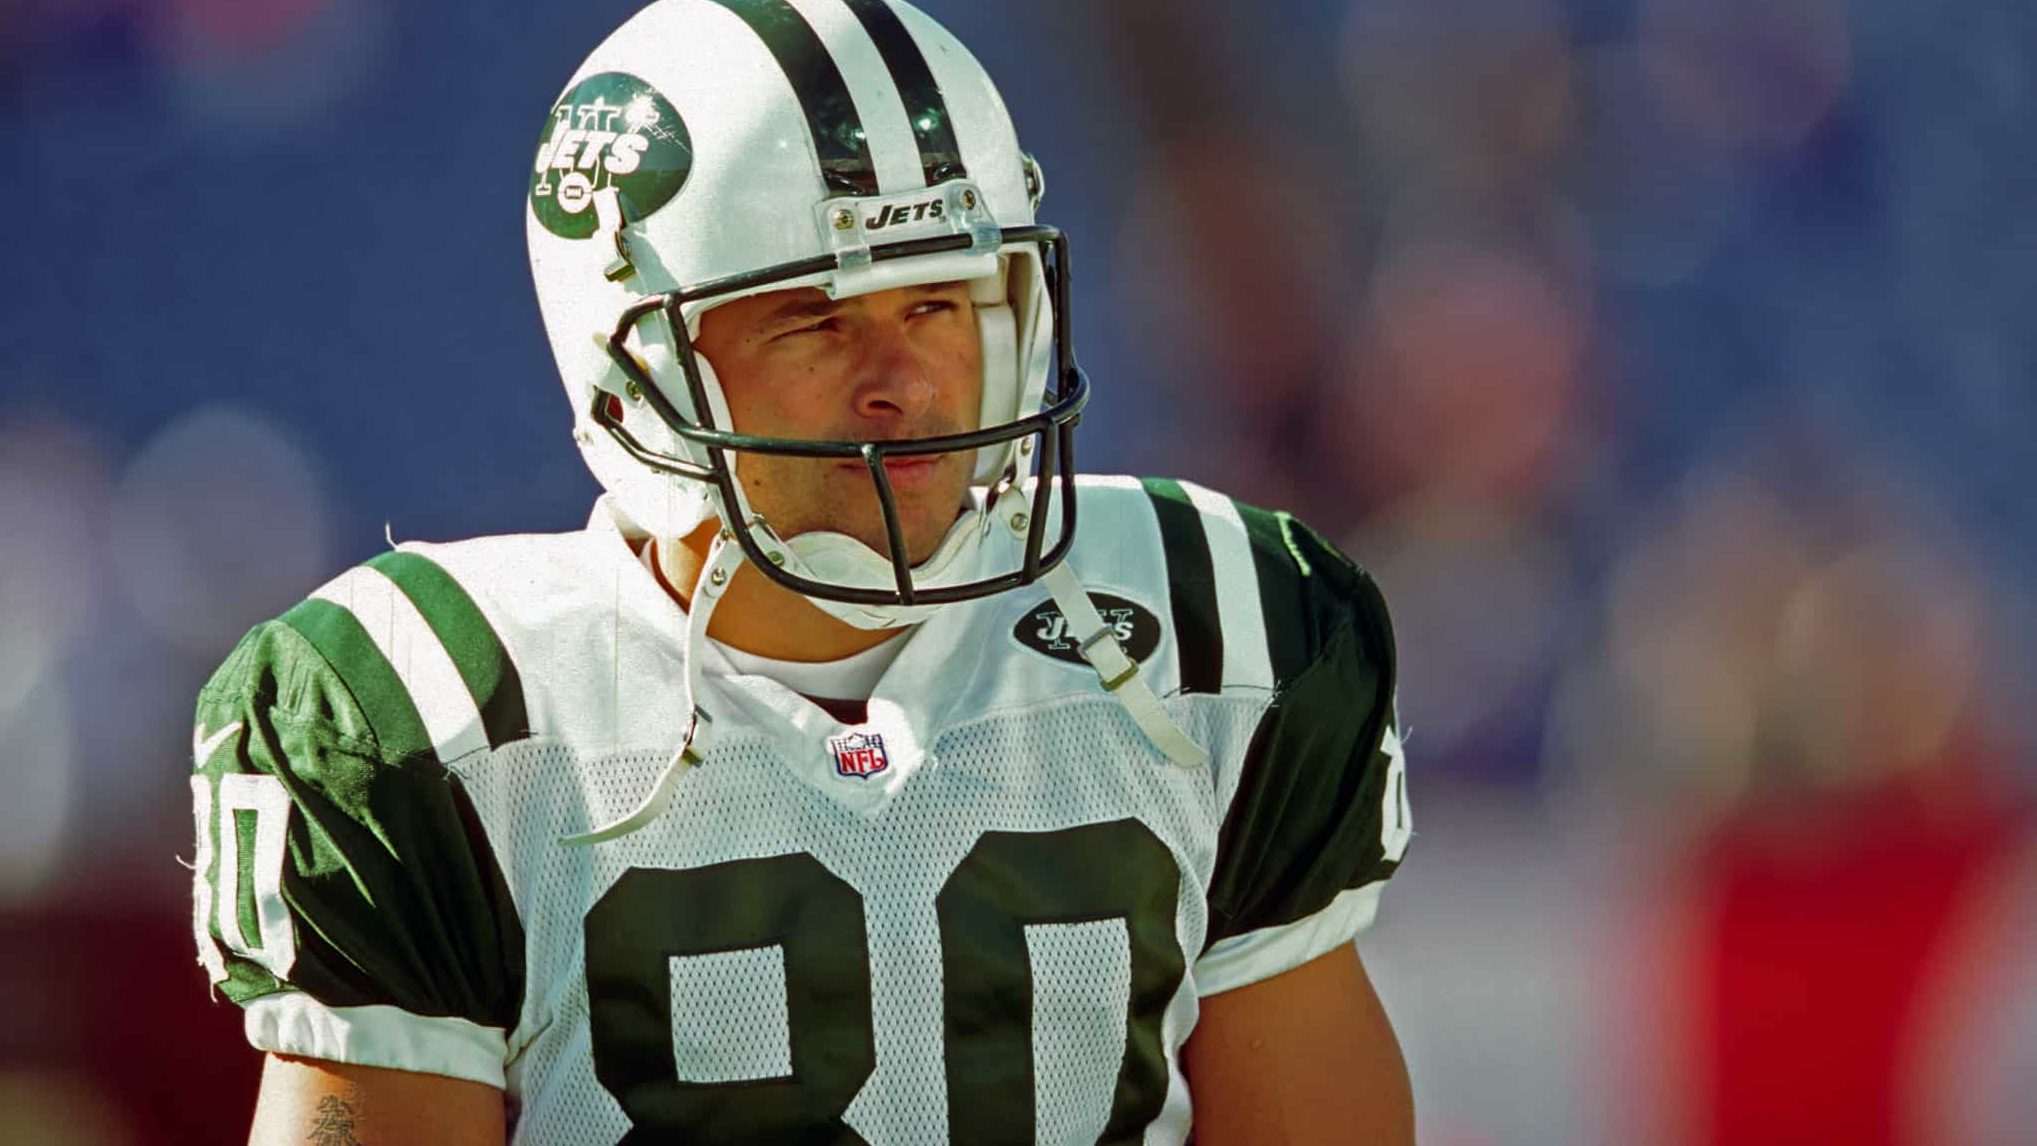 ORCHARD PARK, NY - OCTOBER 29: Wide receiver Wayne Chrebet #80 of the New York Jets looks on from the field before a game against the Buffalo Bills at Ralph Wilson Stadium on October 29, 2000 in Orchard Park, New York. The Bills defeated the Jets 23-20.